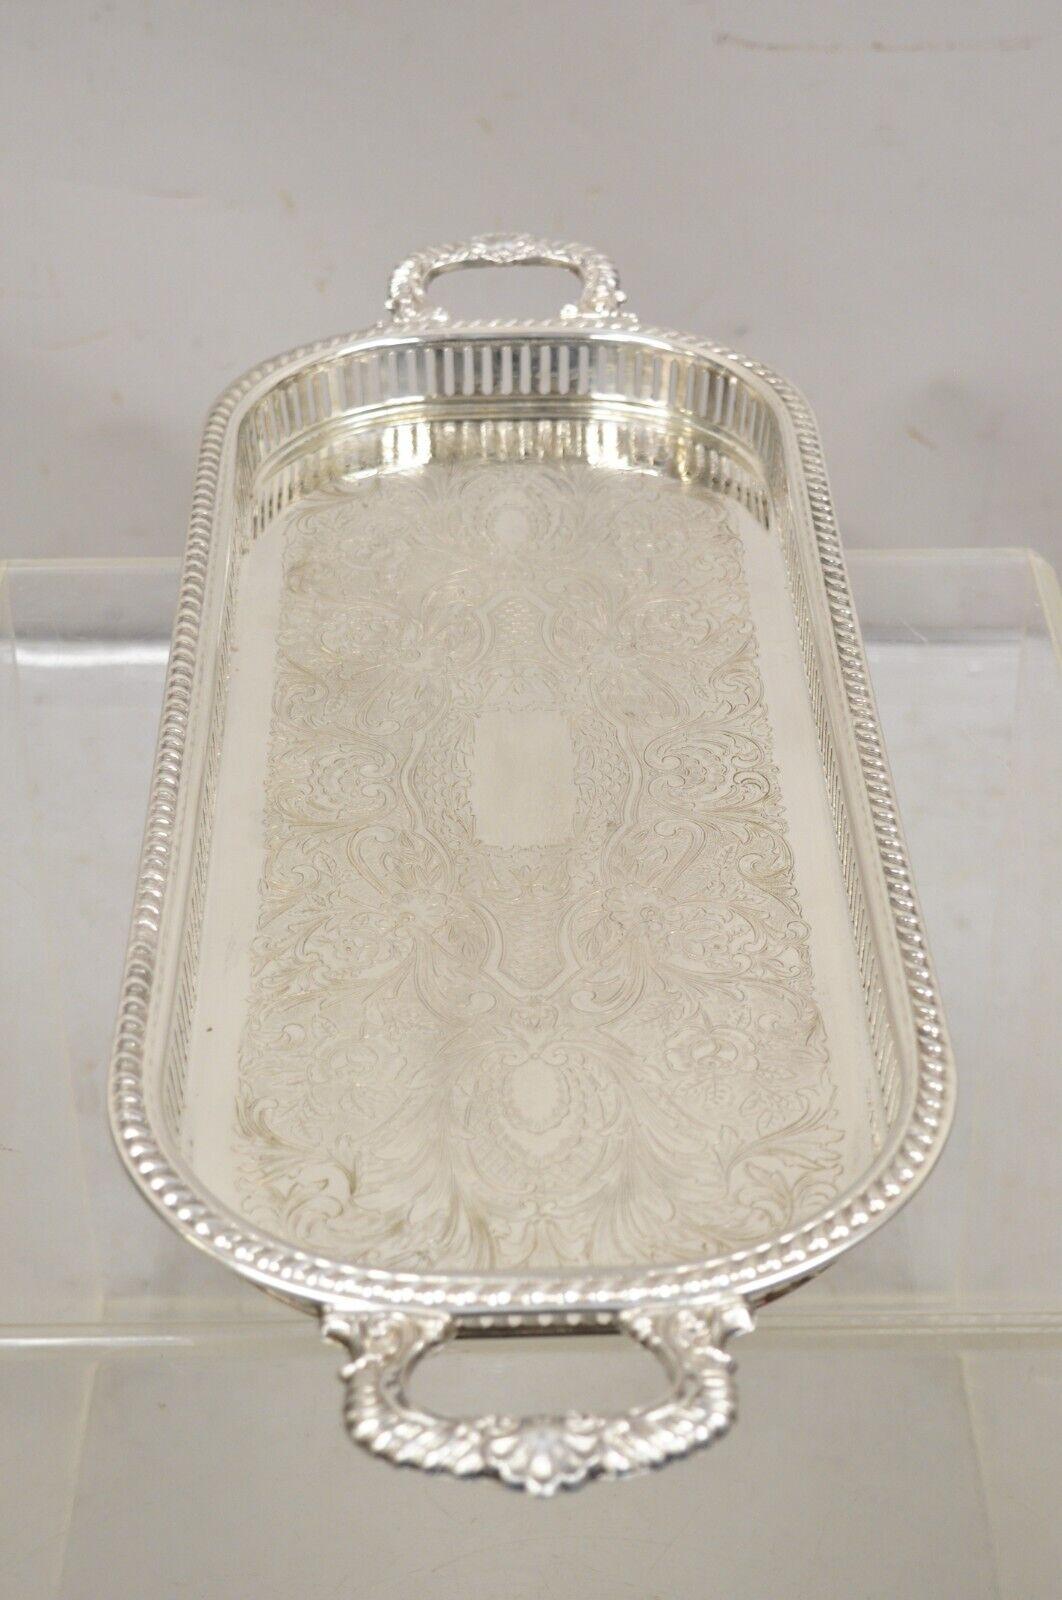 Vintage Victorian Style Silver Plated Narrow Oval Serving Platter Tray by Regency. Circa Mid 20th Century. Measurements:  2.5